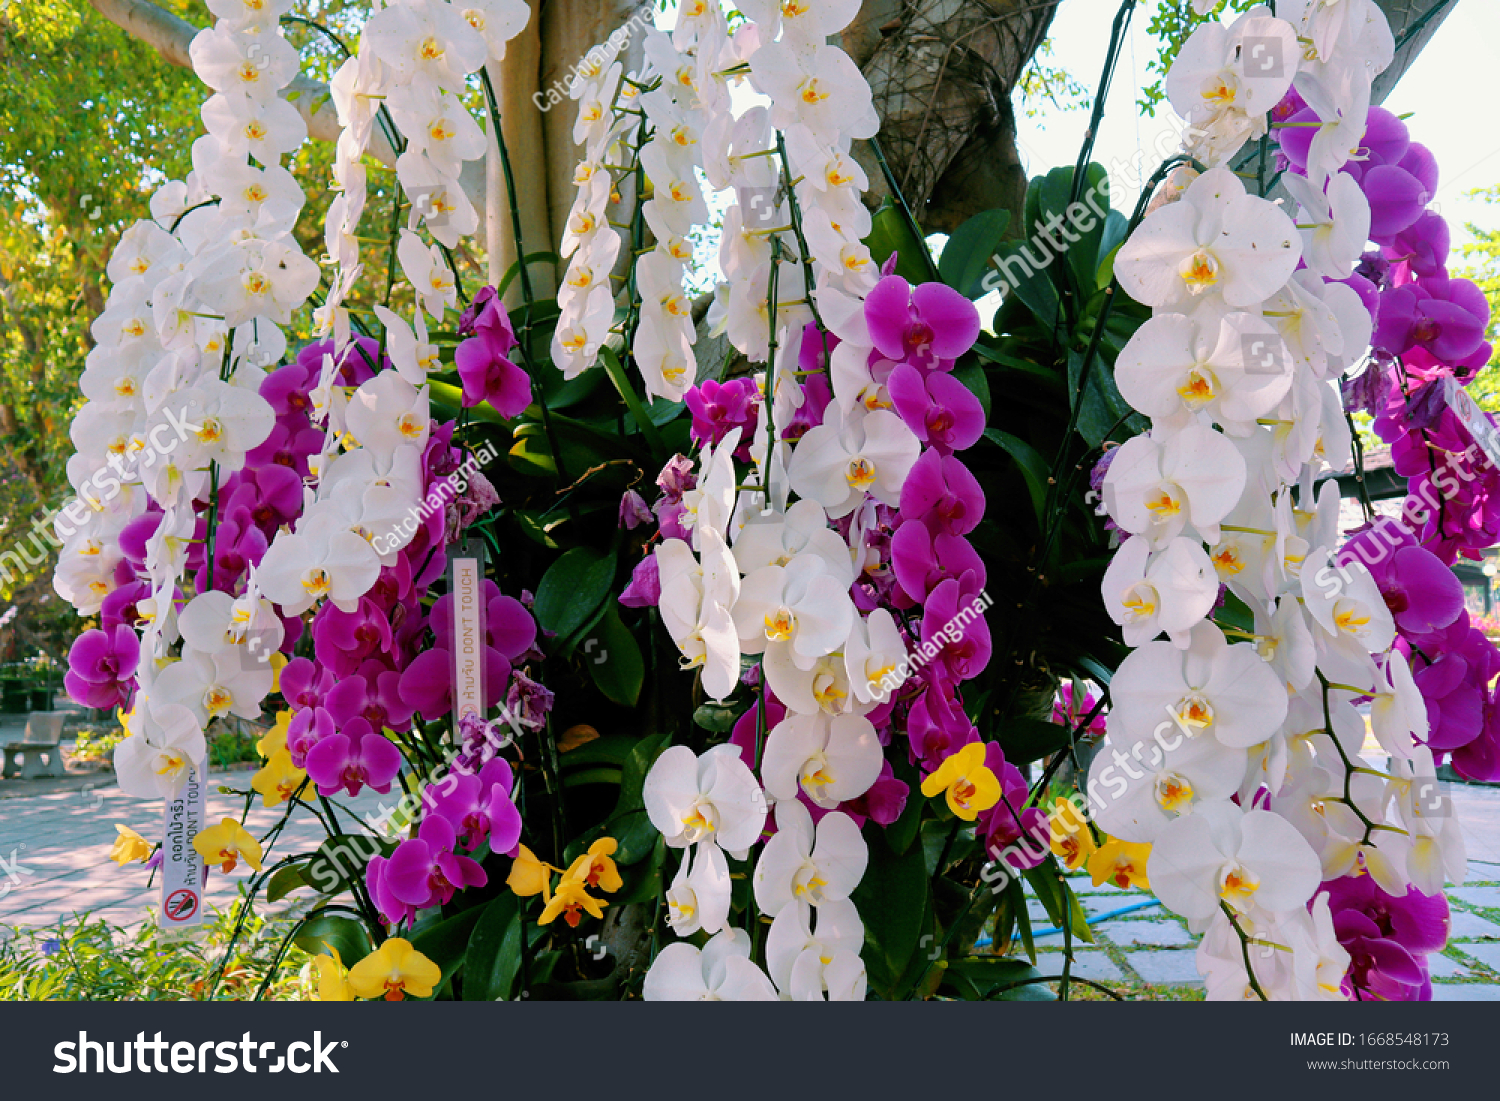 Orchid garden. Orchidaceae. orchids are available in purple, white, yellow. Beautiful flower garden. beautiful orchids. Chiang Mai, Thailand. white and purple flower. Phalaenopsis Orchids. #1668548173